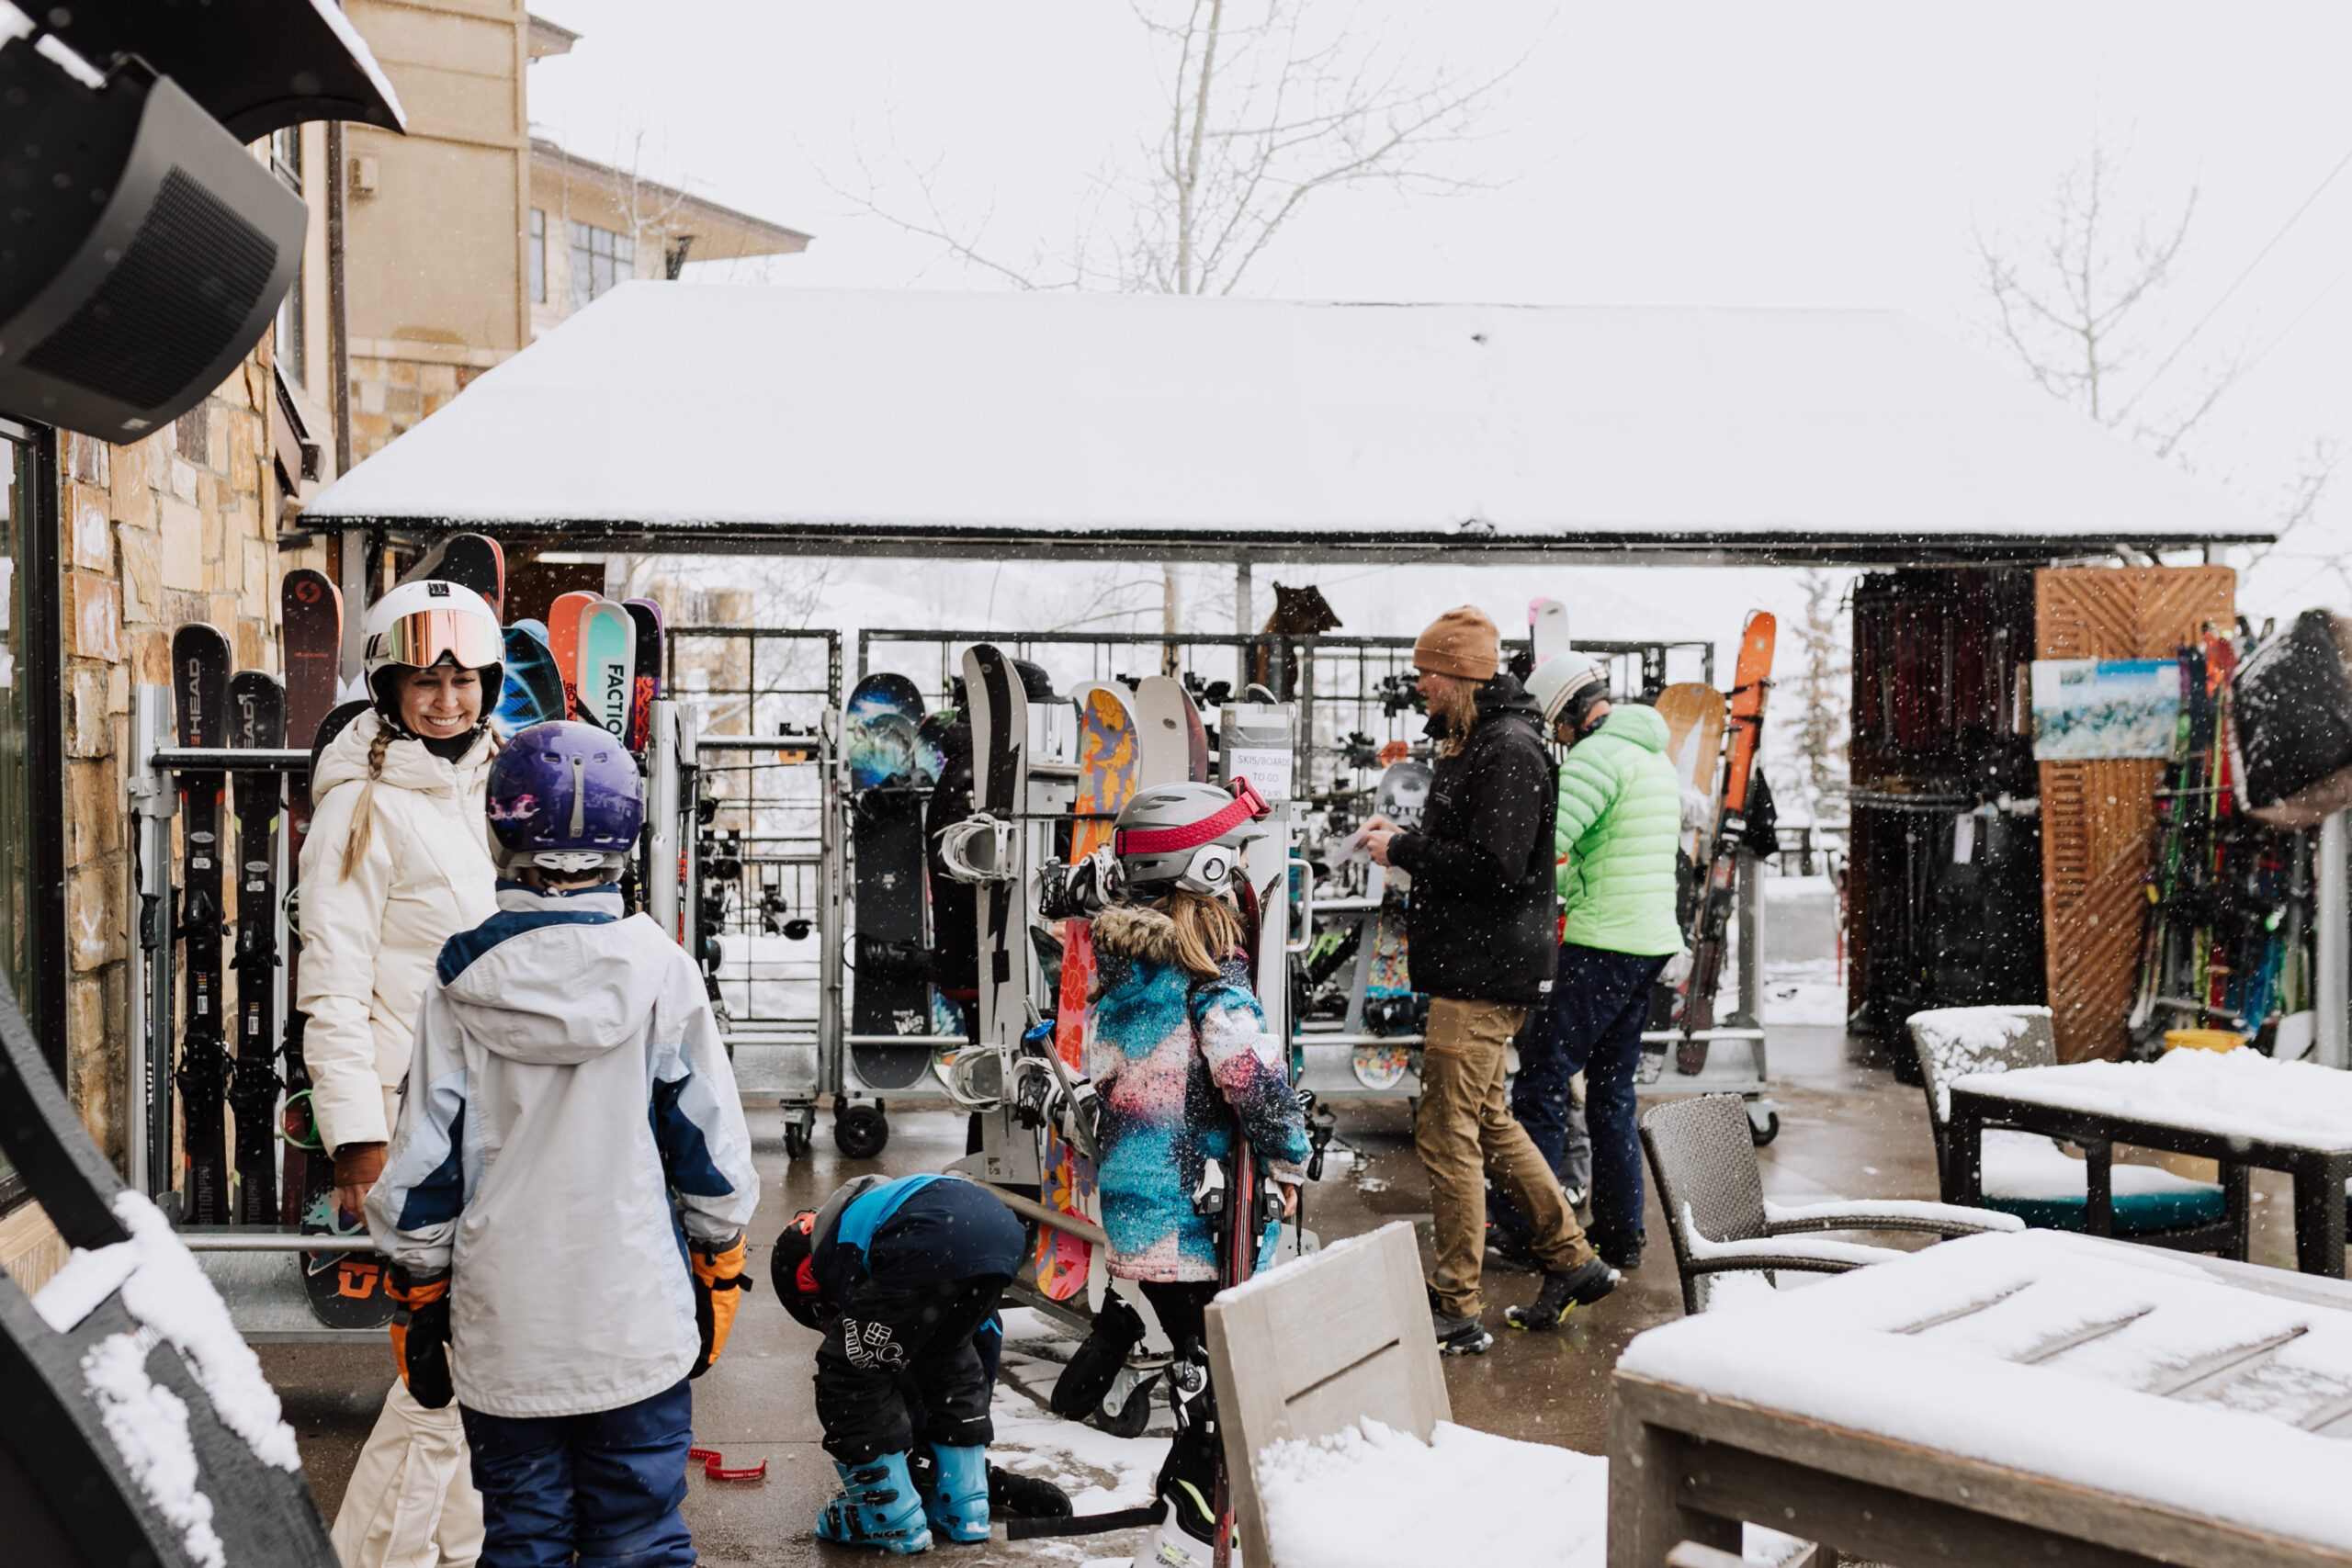 checking in with our gear at the ski valet at the viceroy snowmass ski-in ski-out property #viceroysnowmass #aspensnowmass #skivalet #luxurytravel